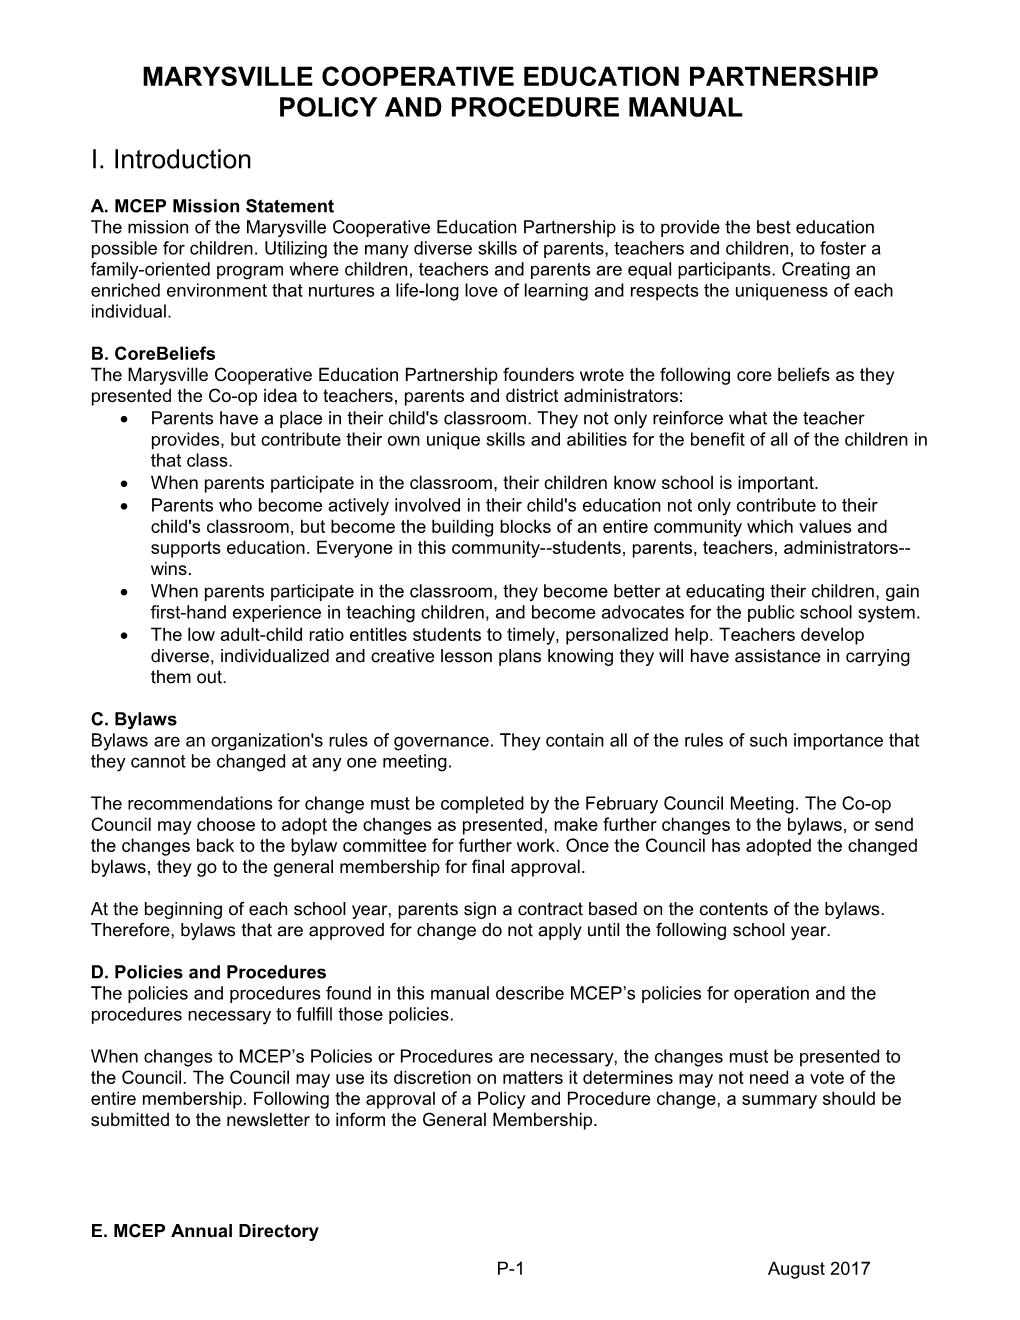 Marysville Cooperative Education Partnership Policy and Procedure Manual